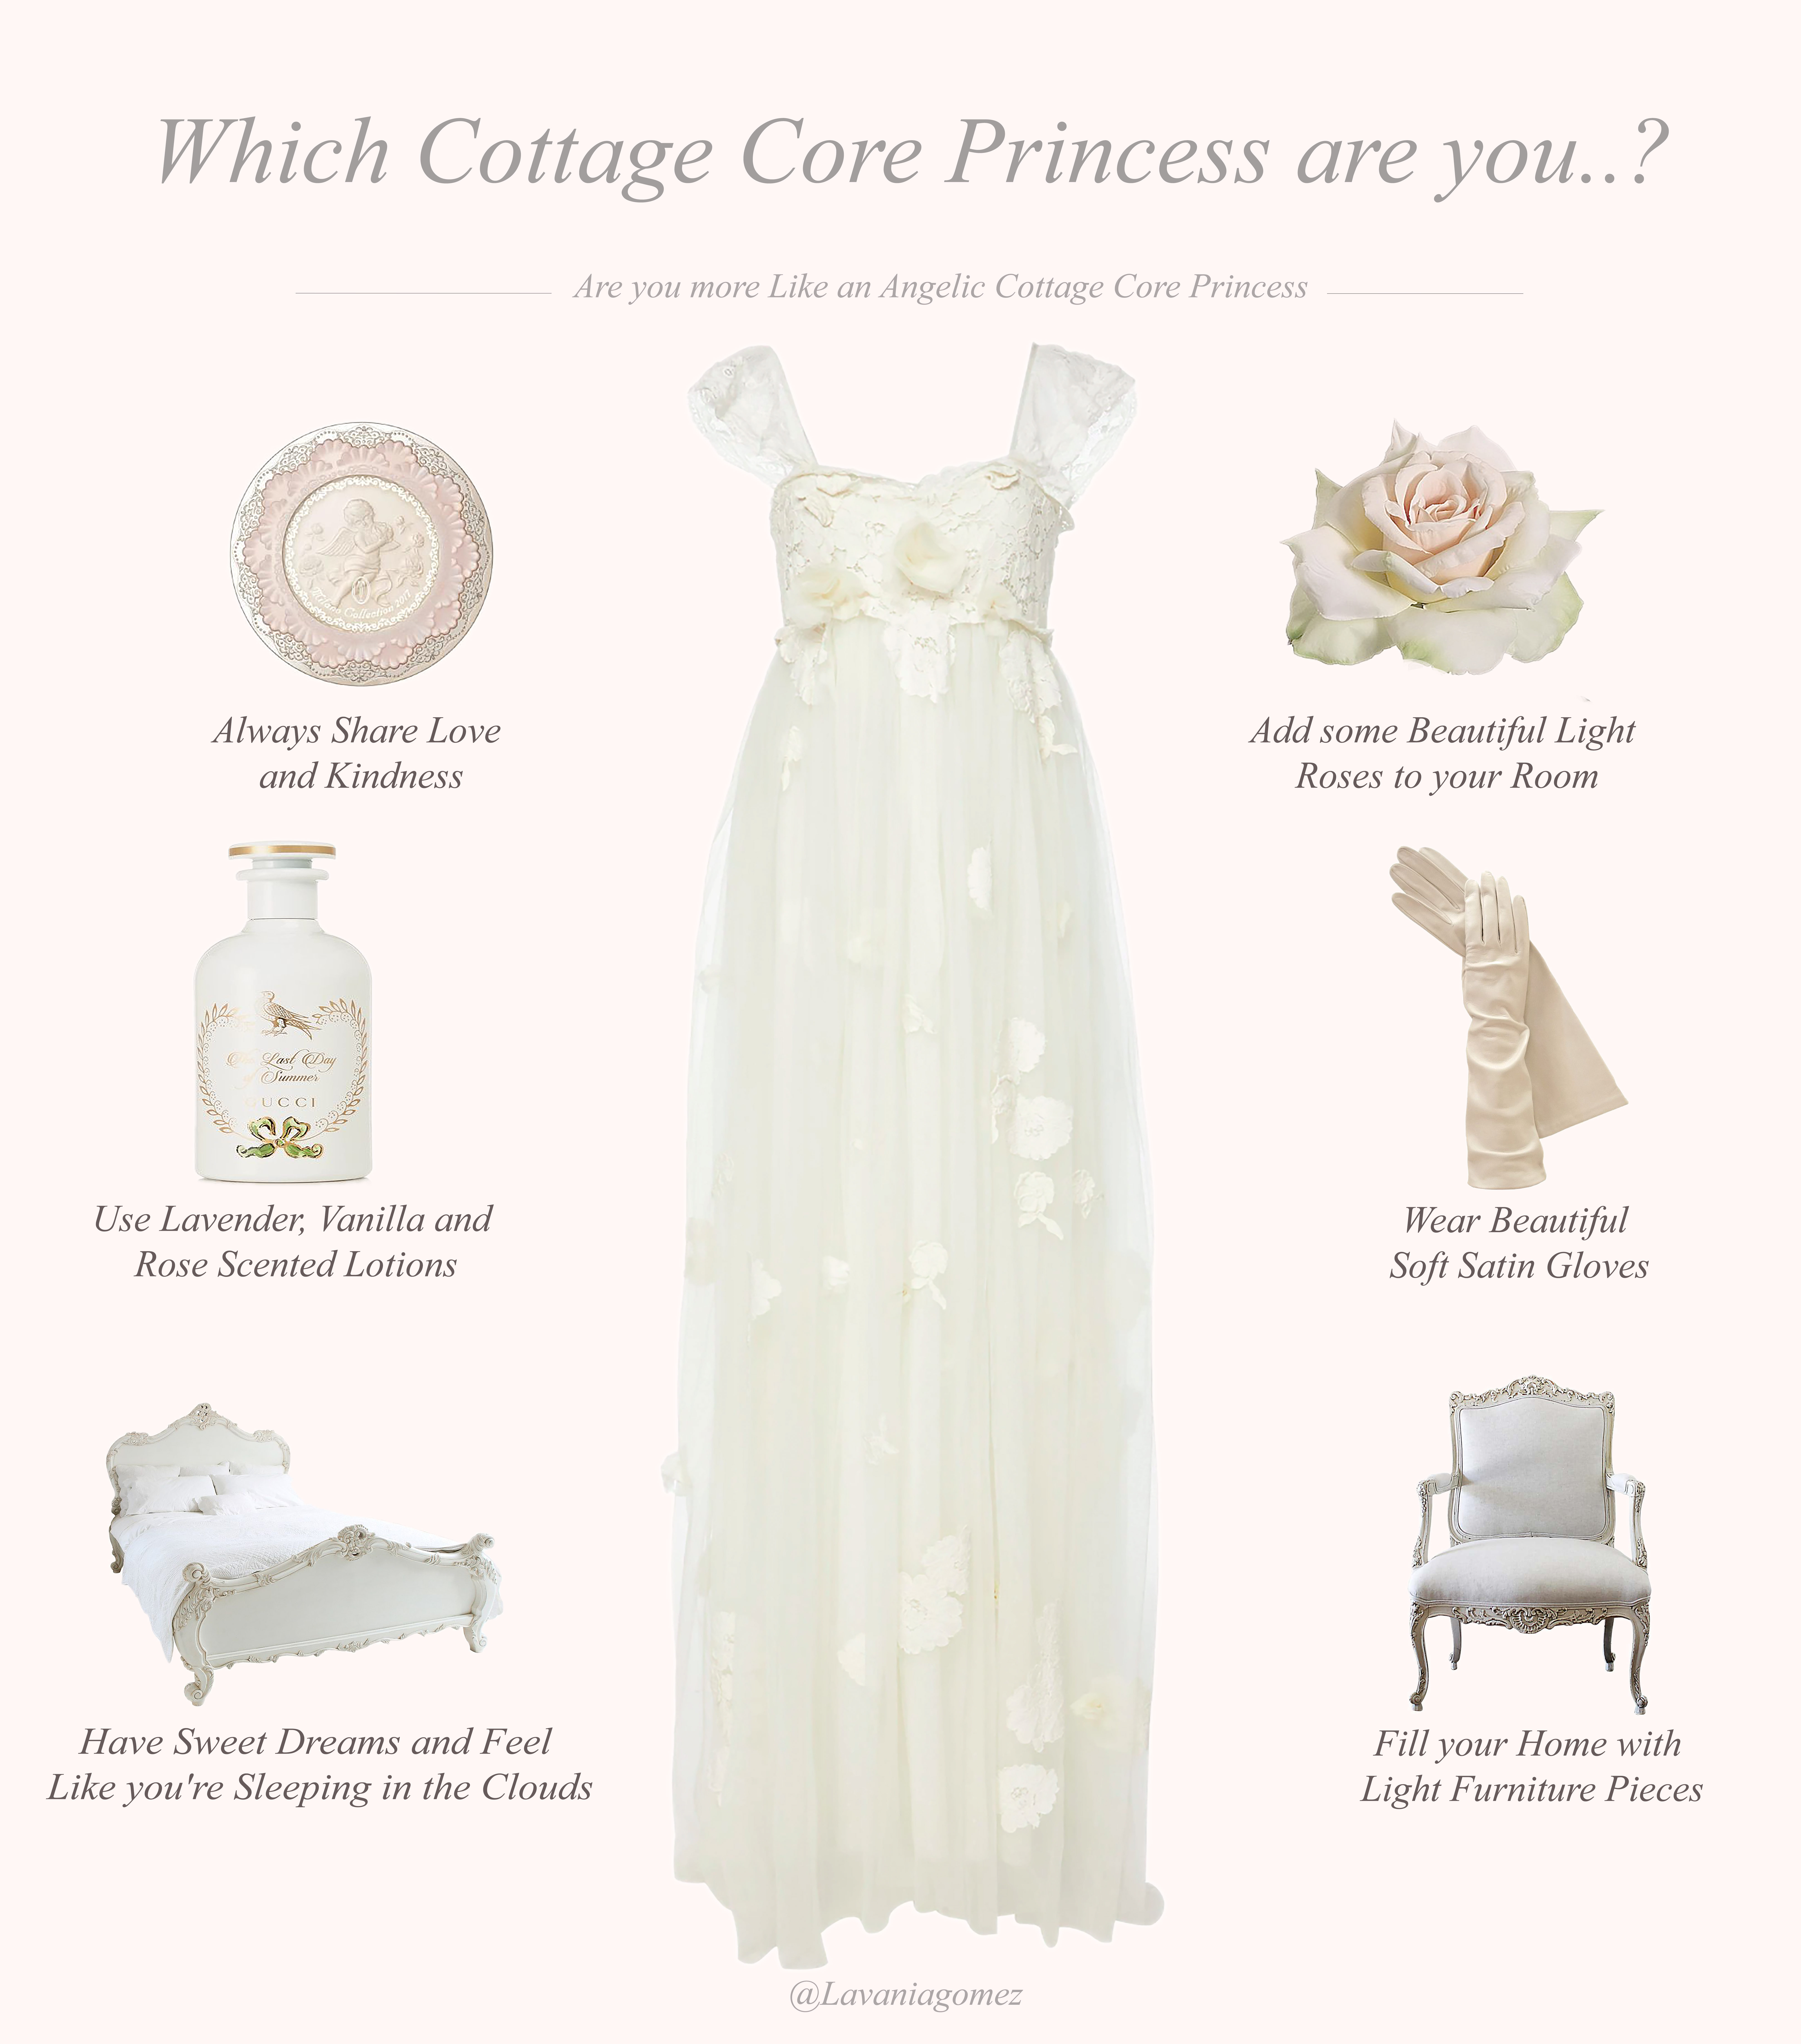 Are you More Like an Angelic Cottage Core Princess